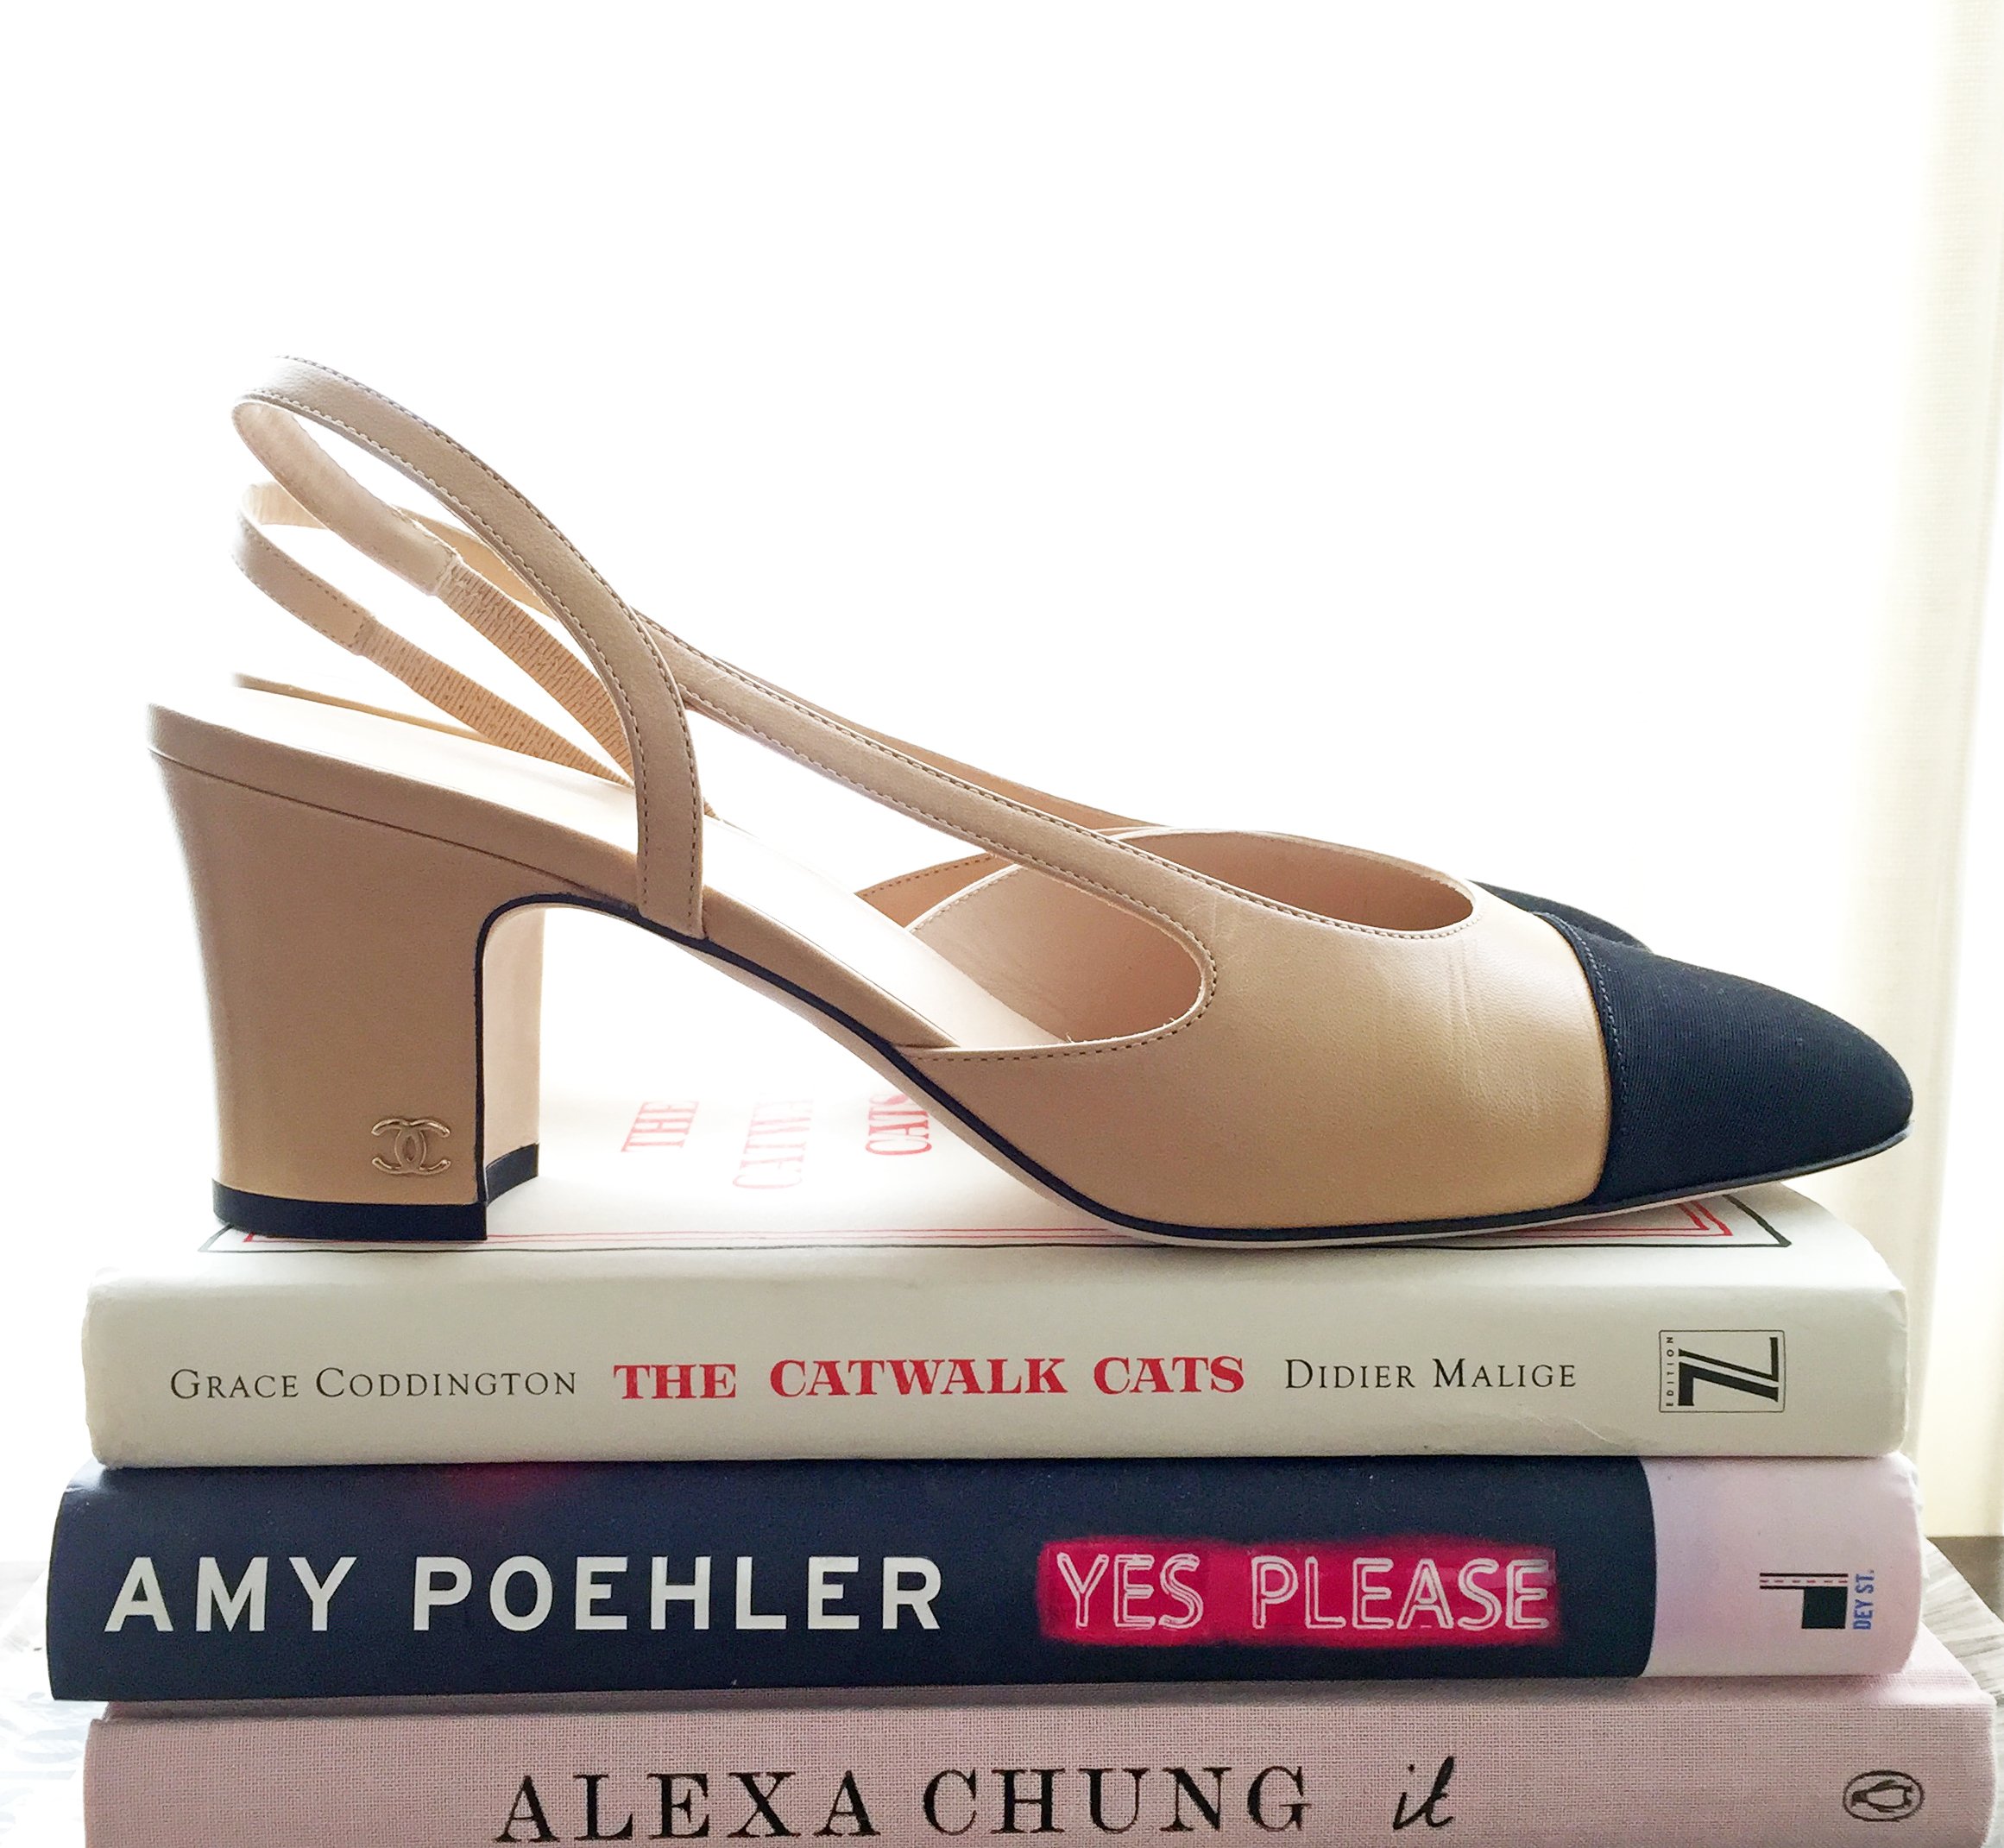 Chanel Slingbacks Review: Everything you need to know